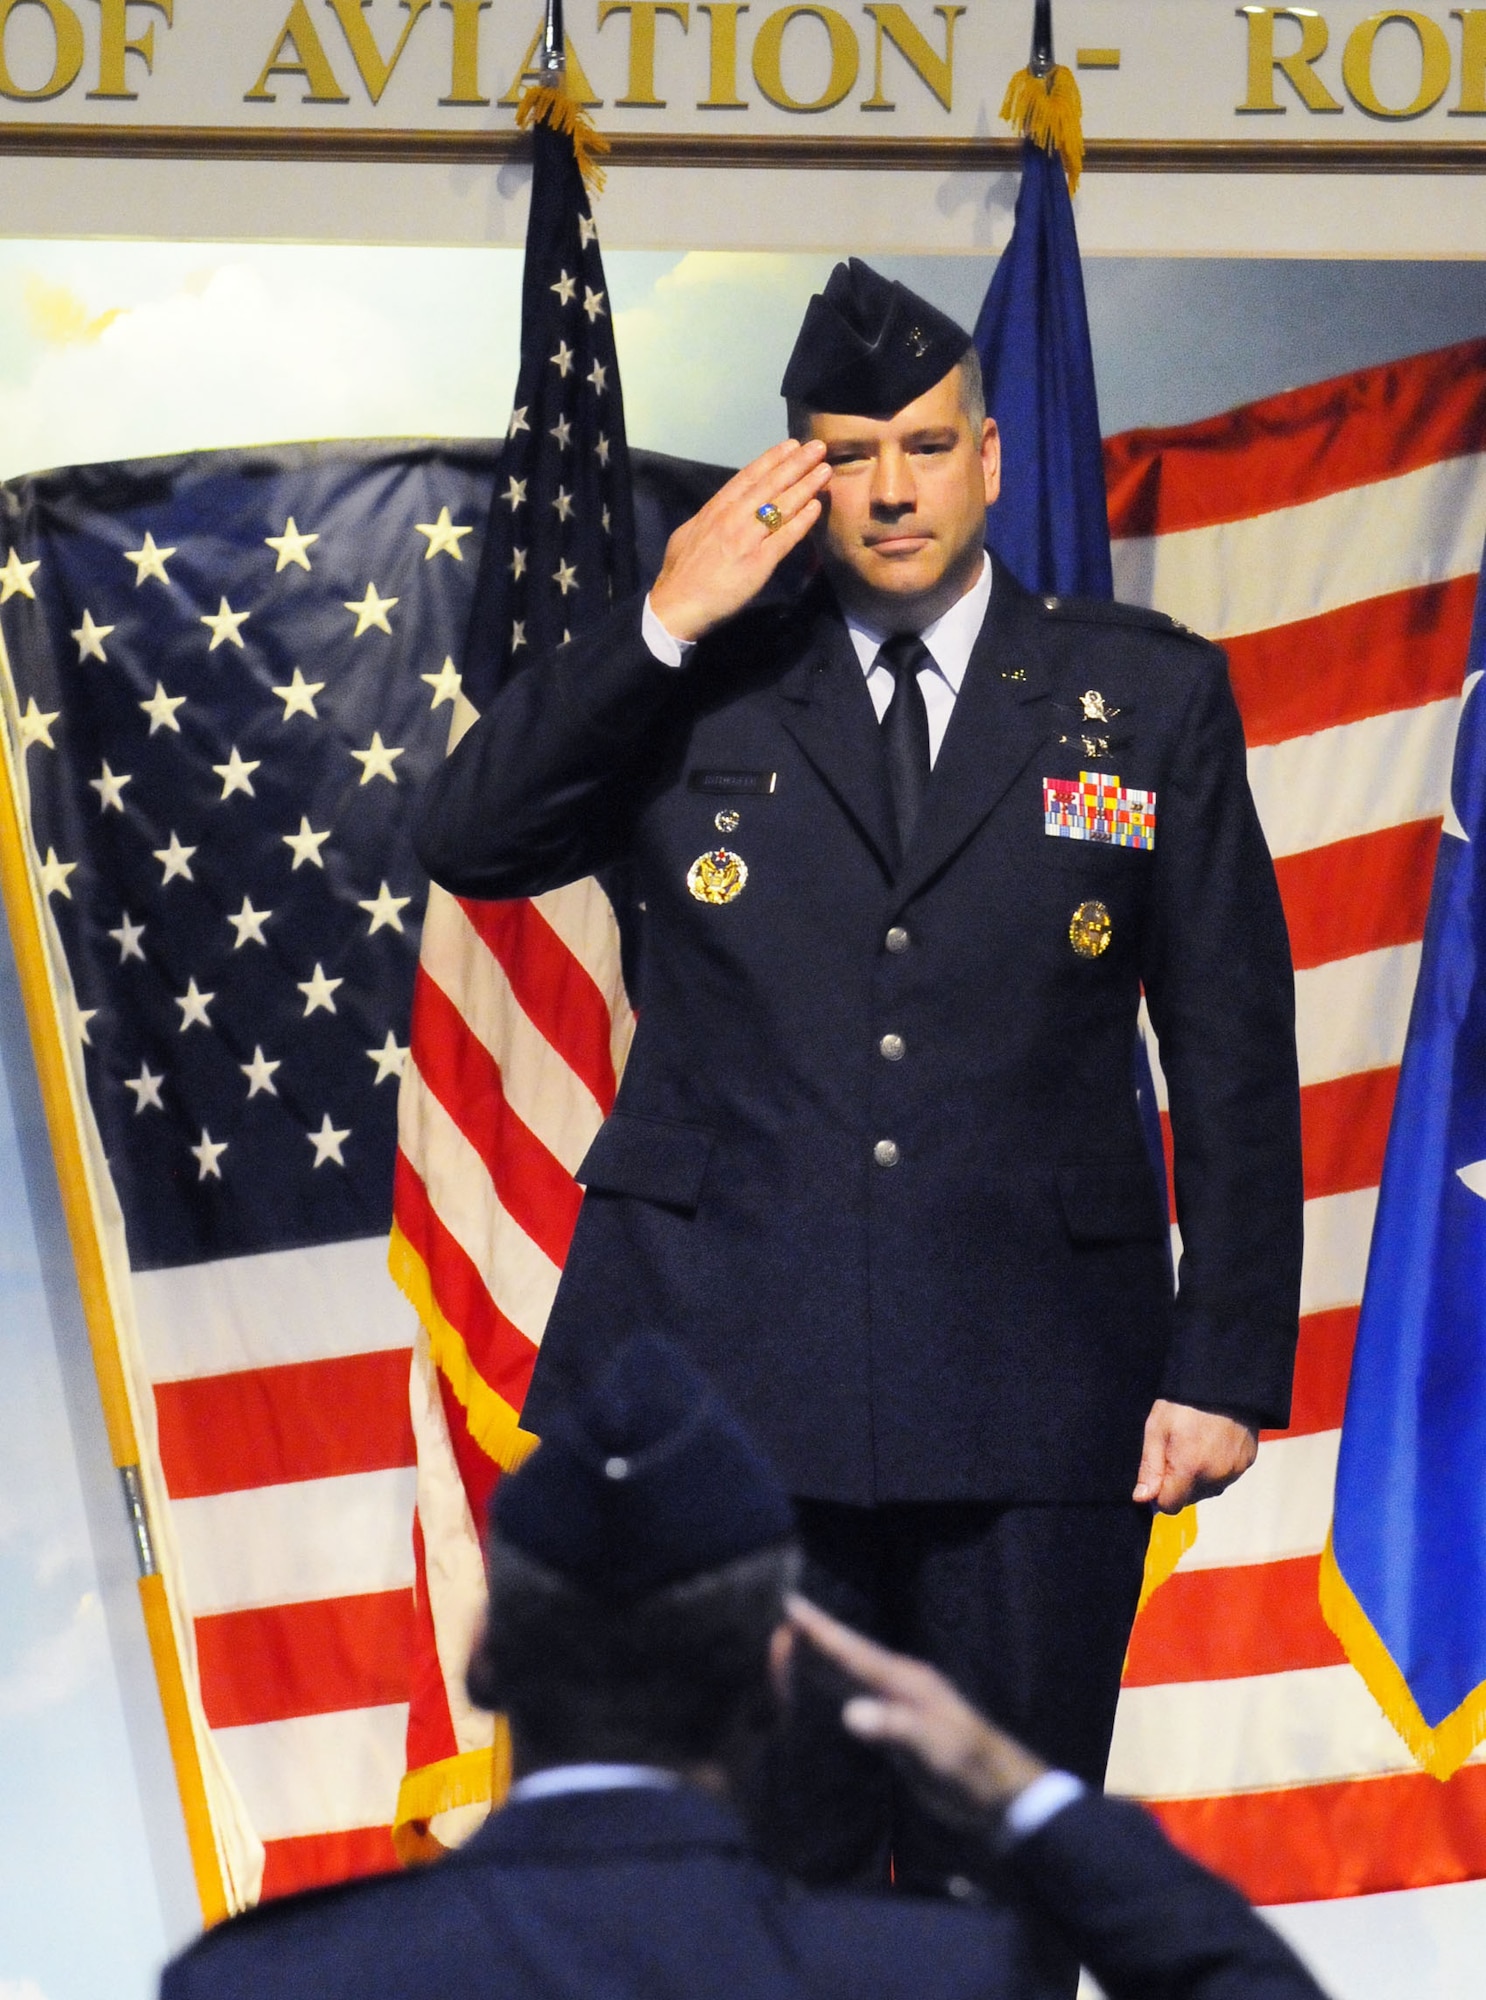 Colonel Mitchel H. Butikofer renders his first salute to members of the 78th Air Base Wing after taking command of the wing during a change of command ceremony at the Museum of Aviation. U. S. Air Force photo by Sue Sapp